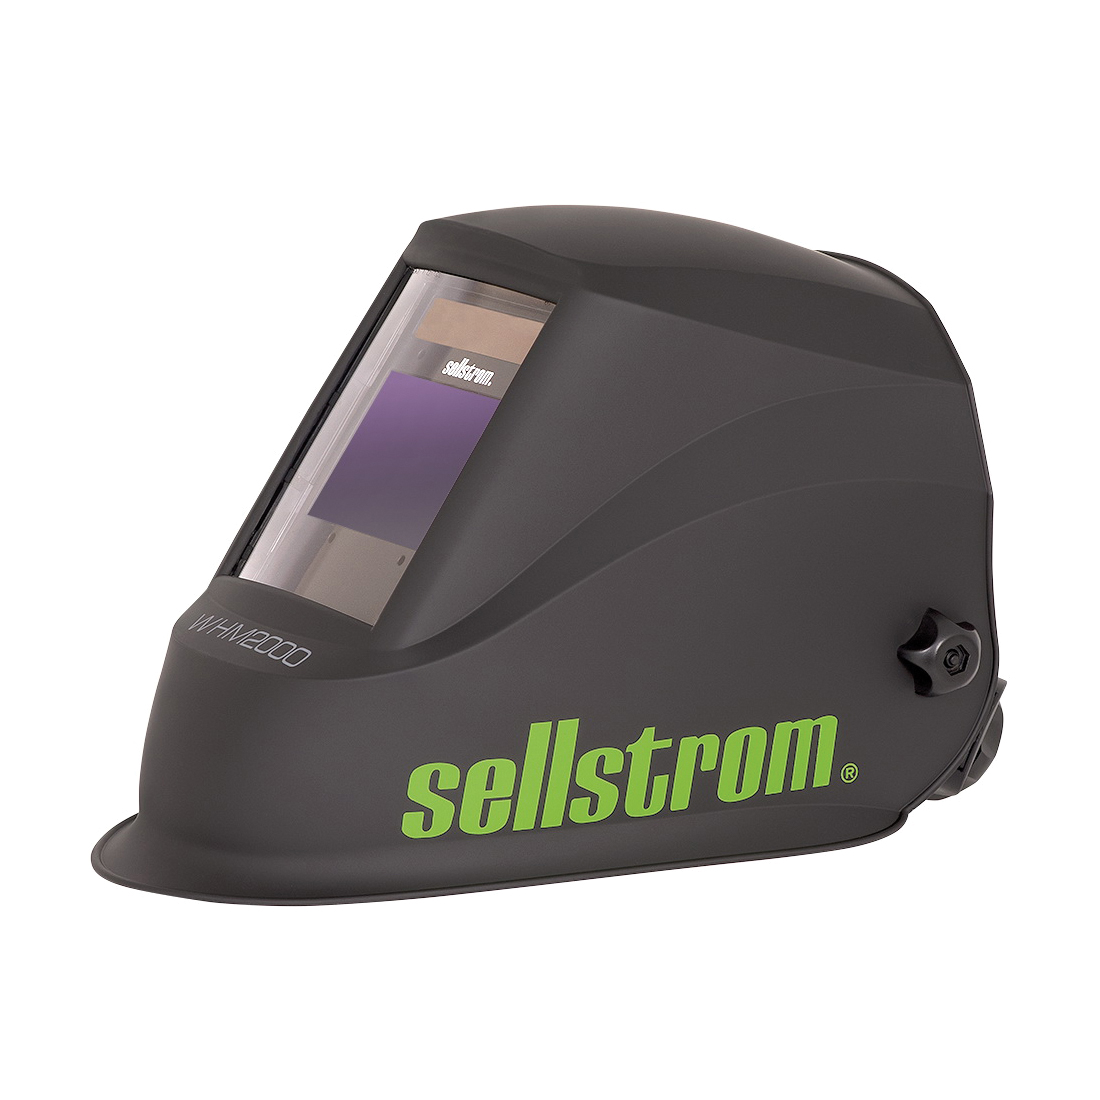 sellstrom® S26200 Advantage Plus Lightweight Welding Helmet With Large Variable ADF, 9 to 13 Lens Shade, Black/Green, 3.94 x 2.36 in Viewing Area, Nylon, Solar/Lithium, ANSI Z87.1, CAN/CSA Z94.3, CE Certified